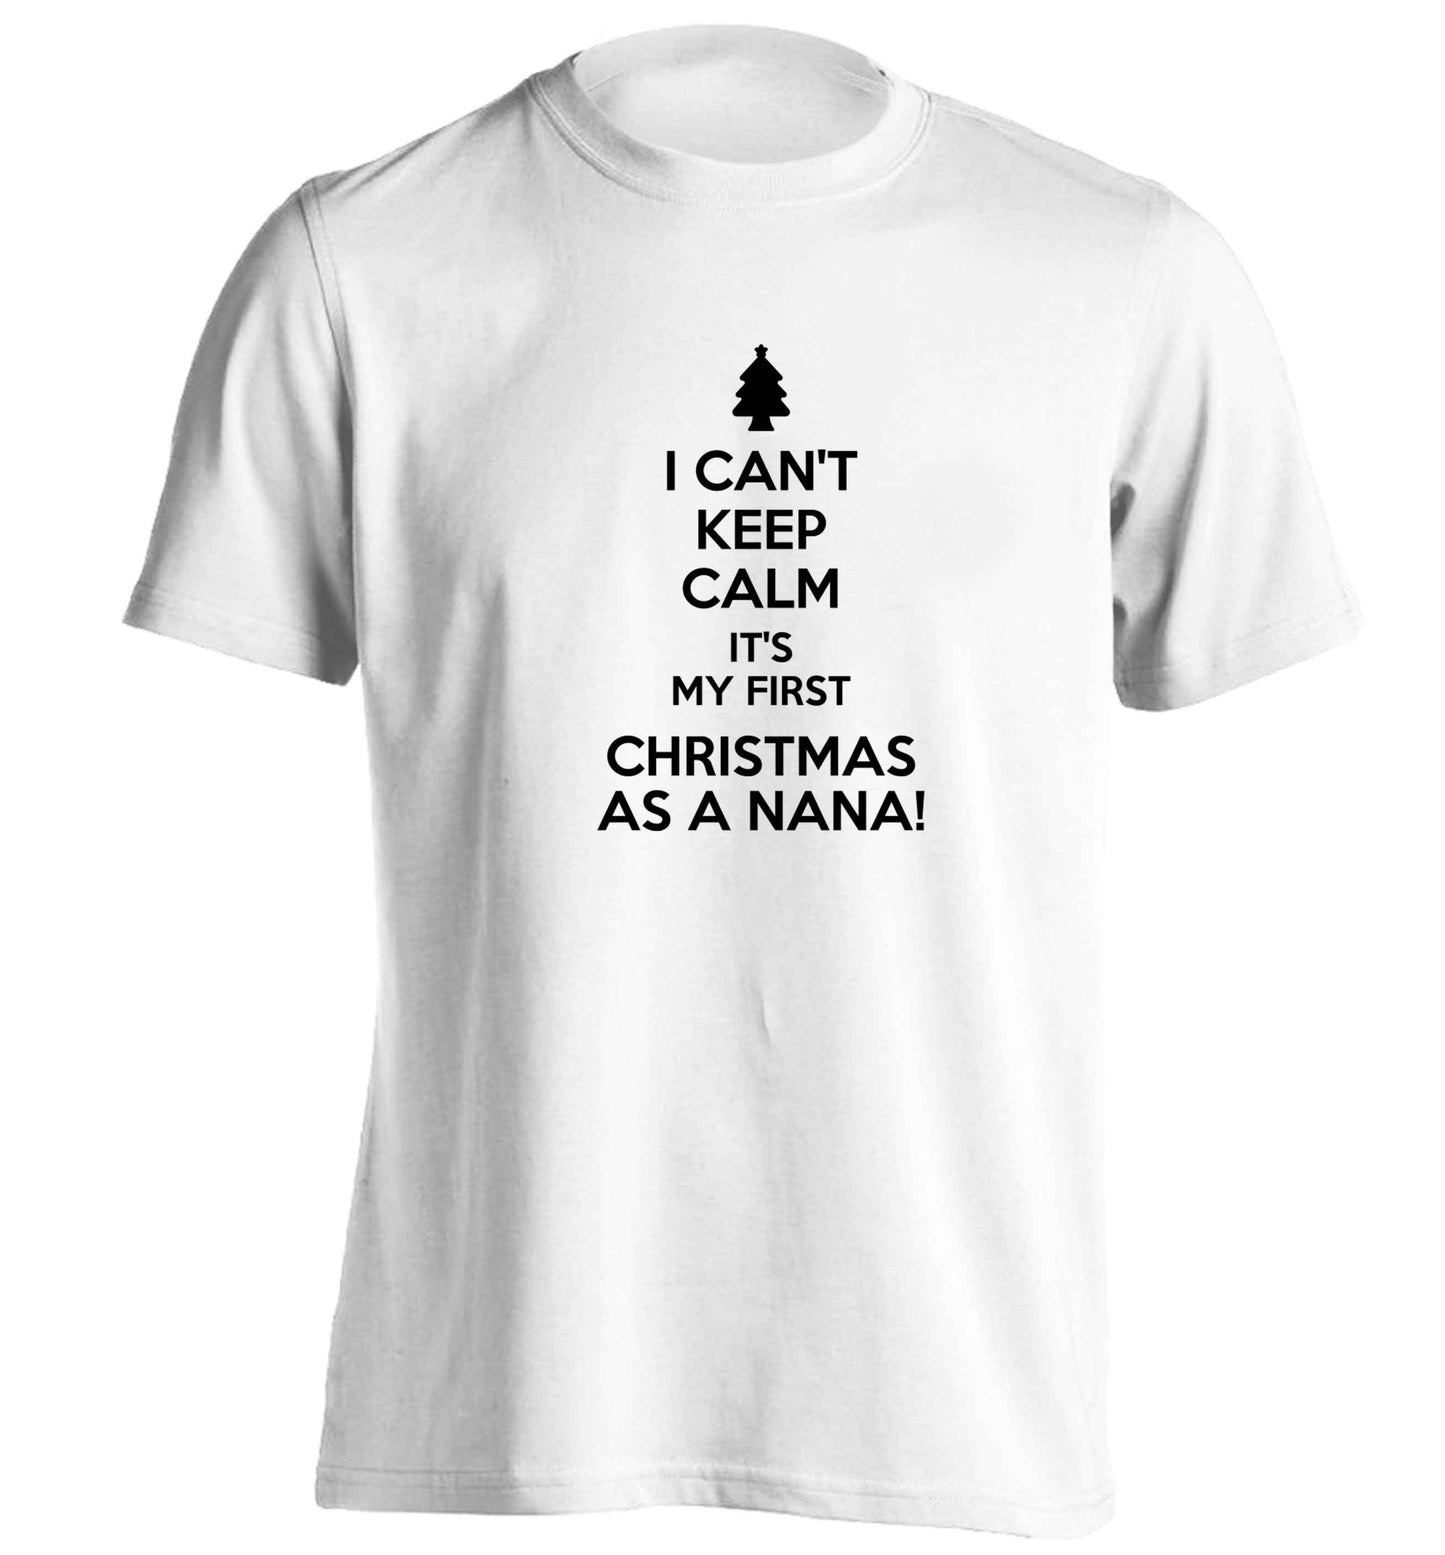 I can't keep calm it's my first Christmas as a nana! adults unisex white Tshirt 2XL